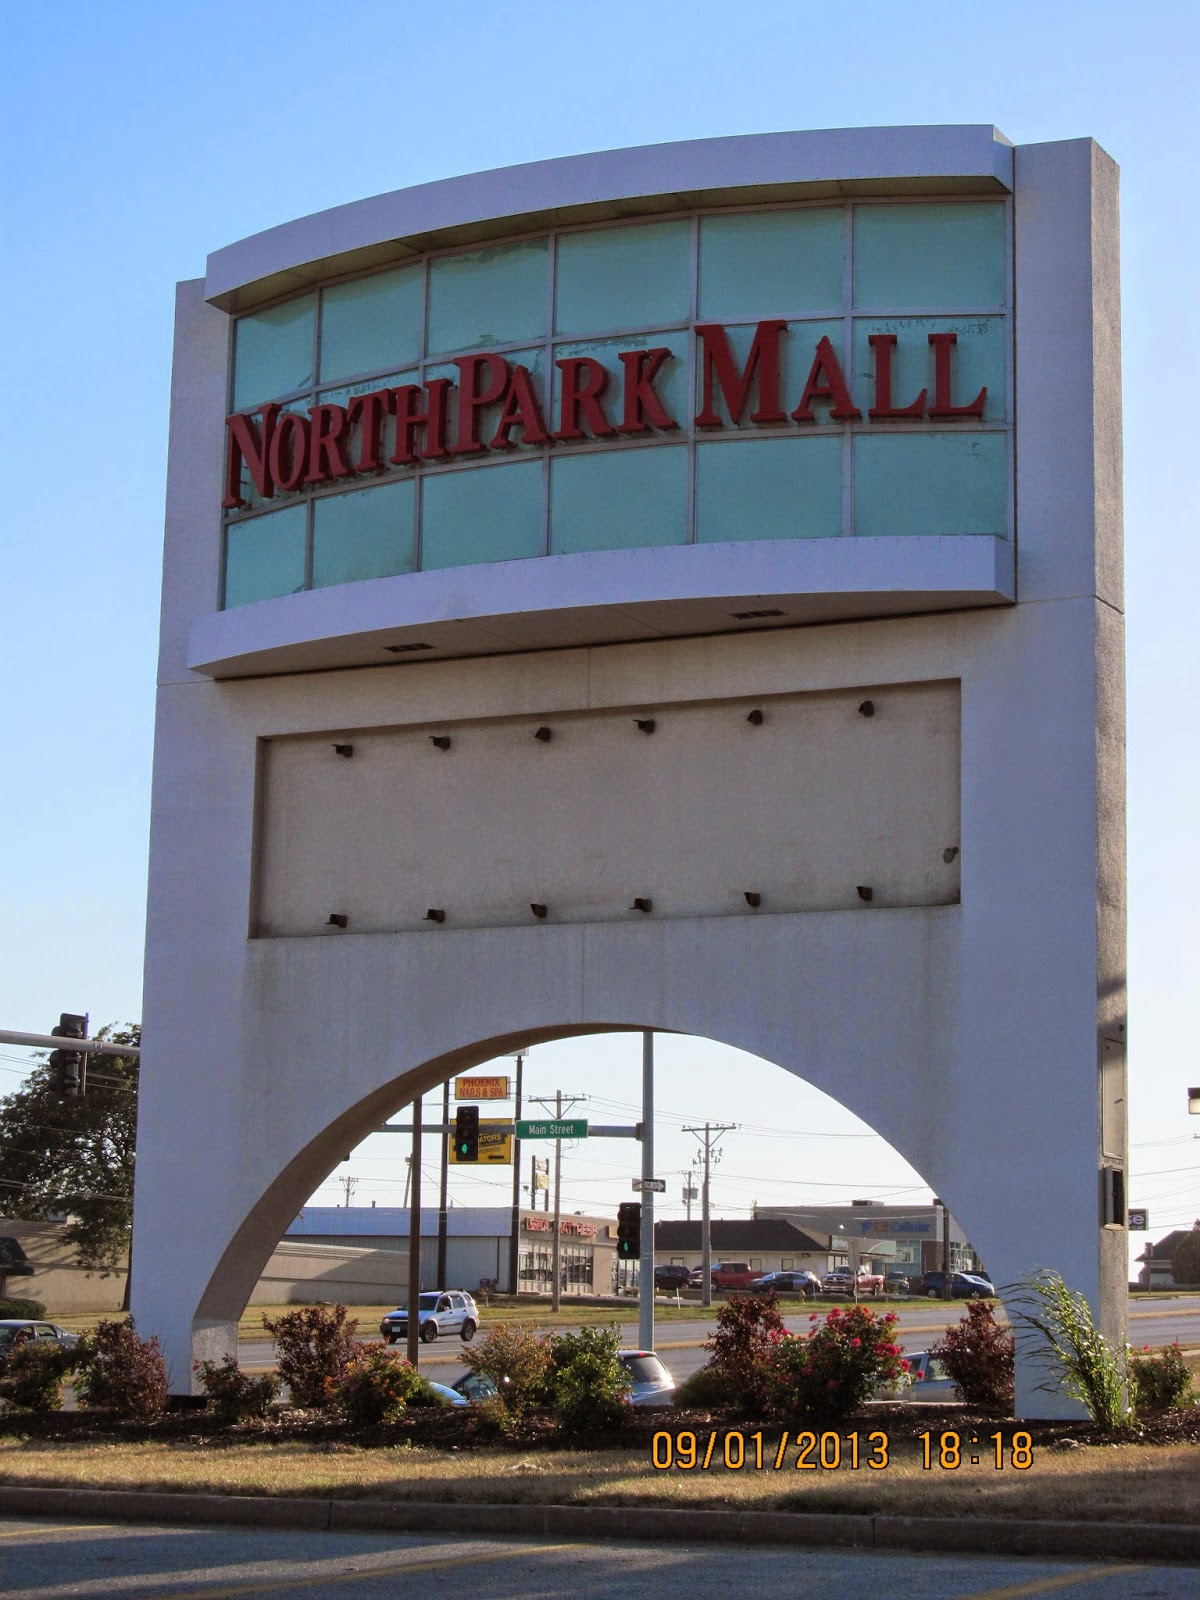 Trip to the Mall North Park Mall (Davenport, IL)